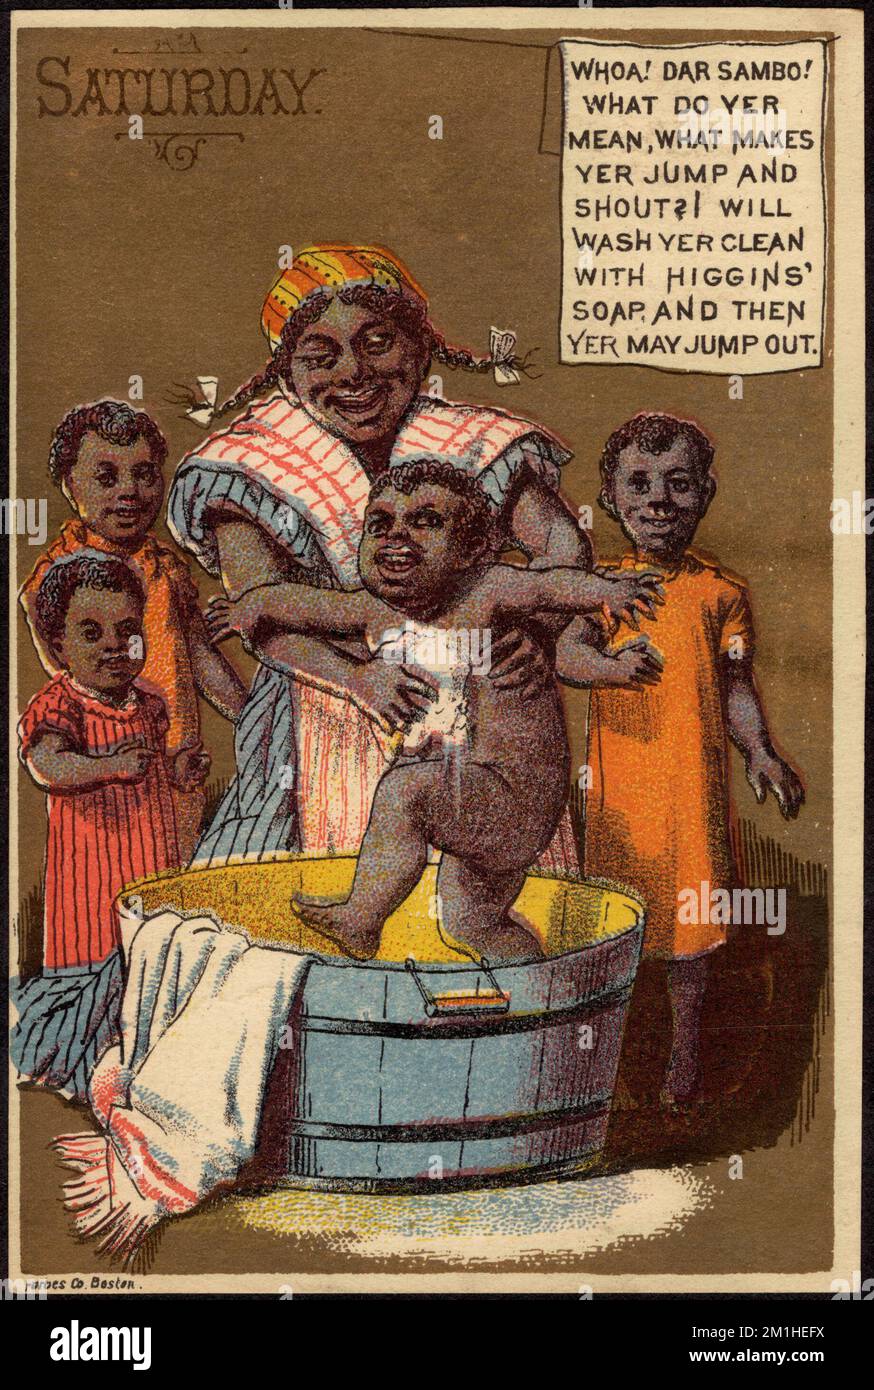 Saturday. Whoa! Dar Sambo! What do yer mean, what makes yer jump and shout? I will wash yer clean with Higgins' soap and then yer may jump out. , Women, Children, Wash tubs, Soaps, 19th Century American Trade Cards Stock Photo